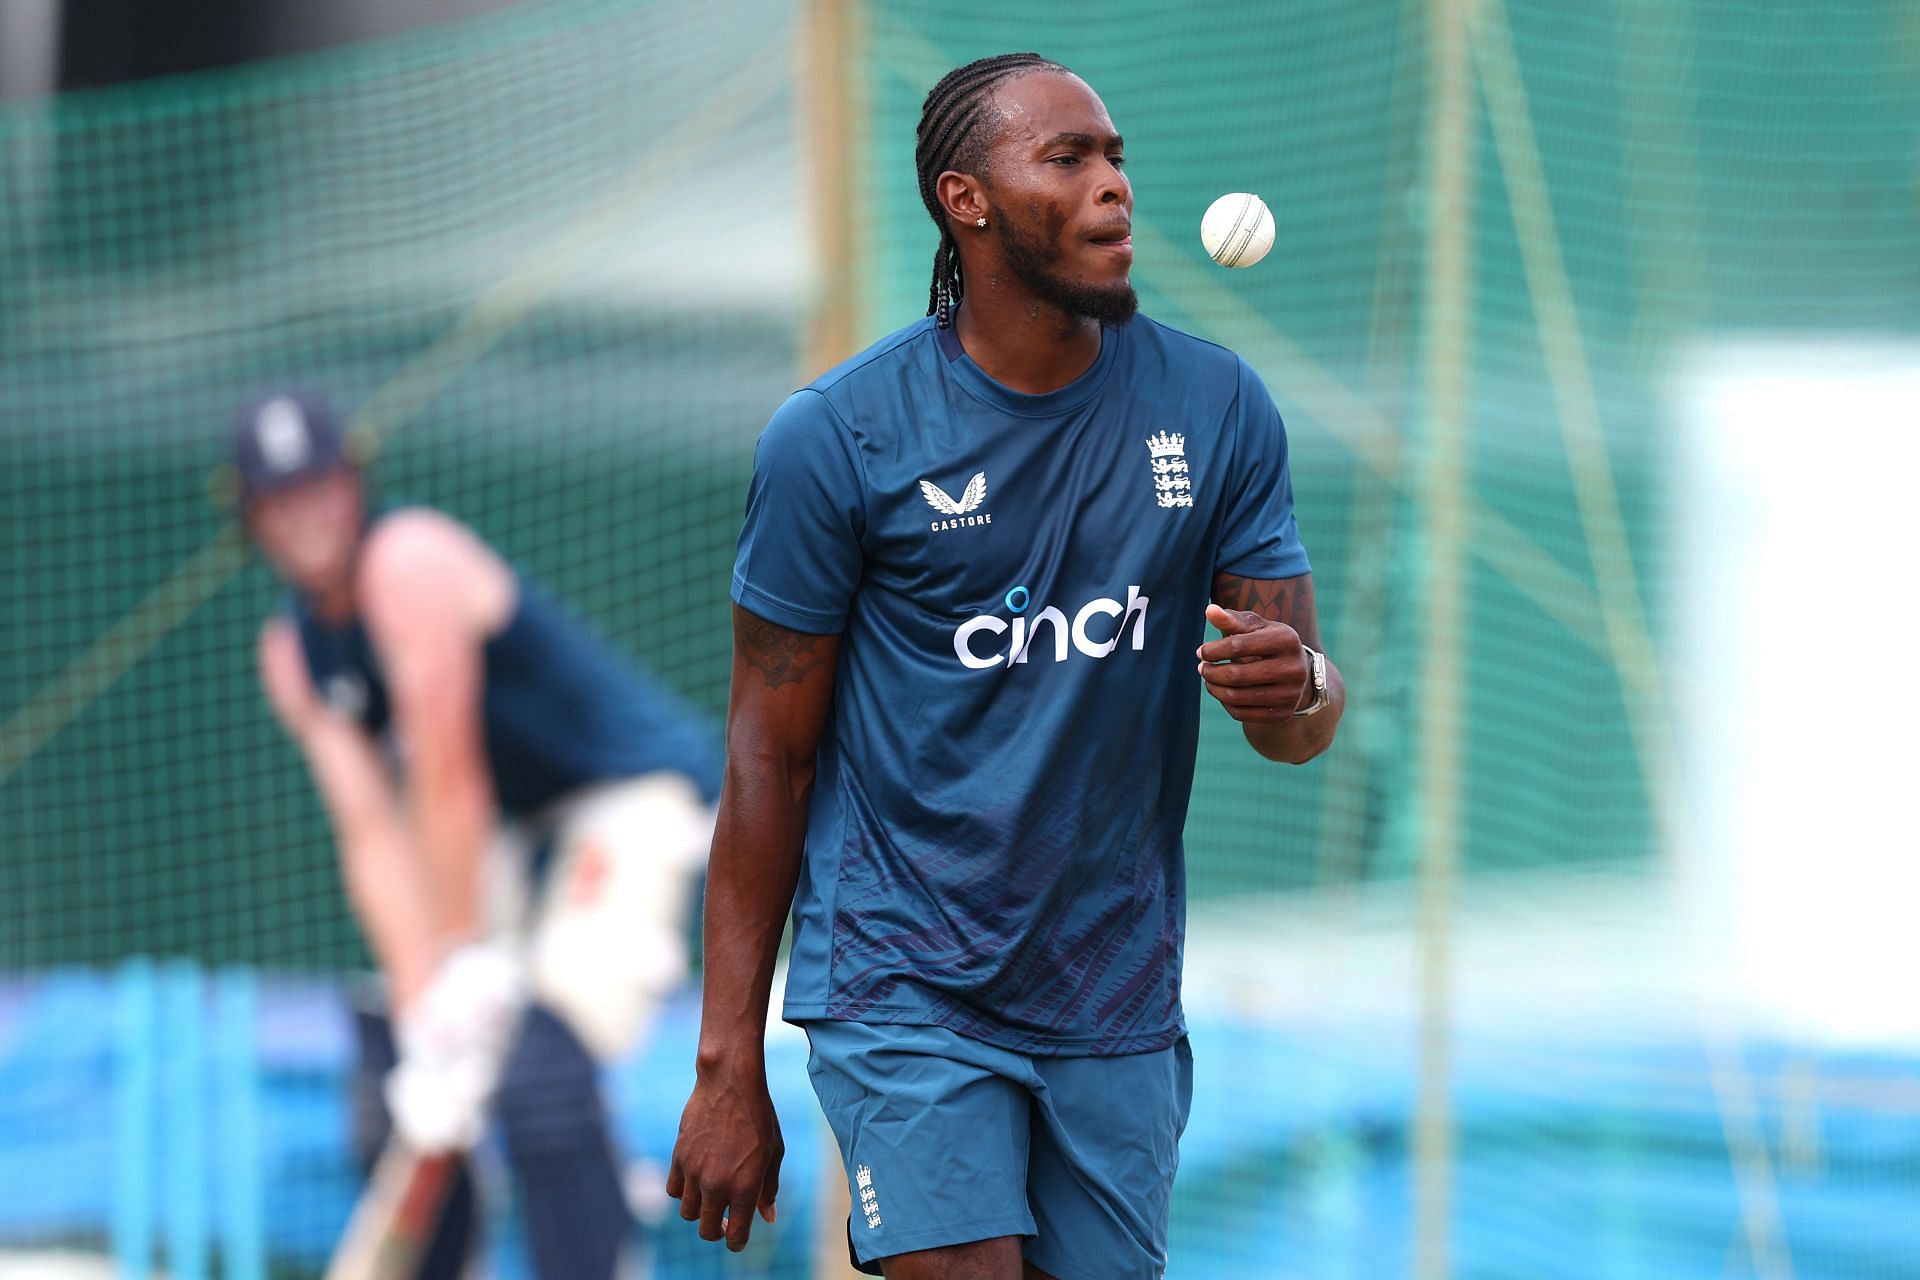 Jofra Archer has been battling constant injury woes. (Pic: Getty Images)